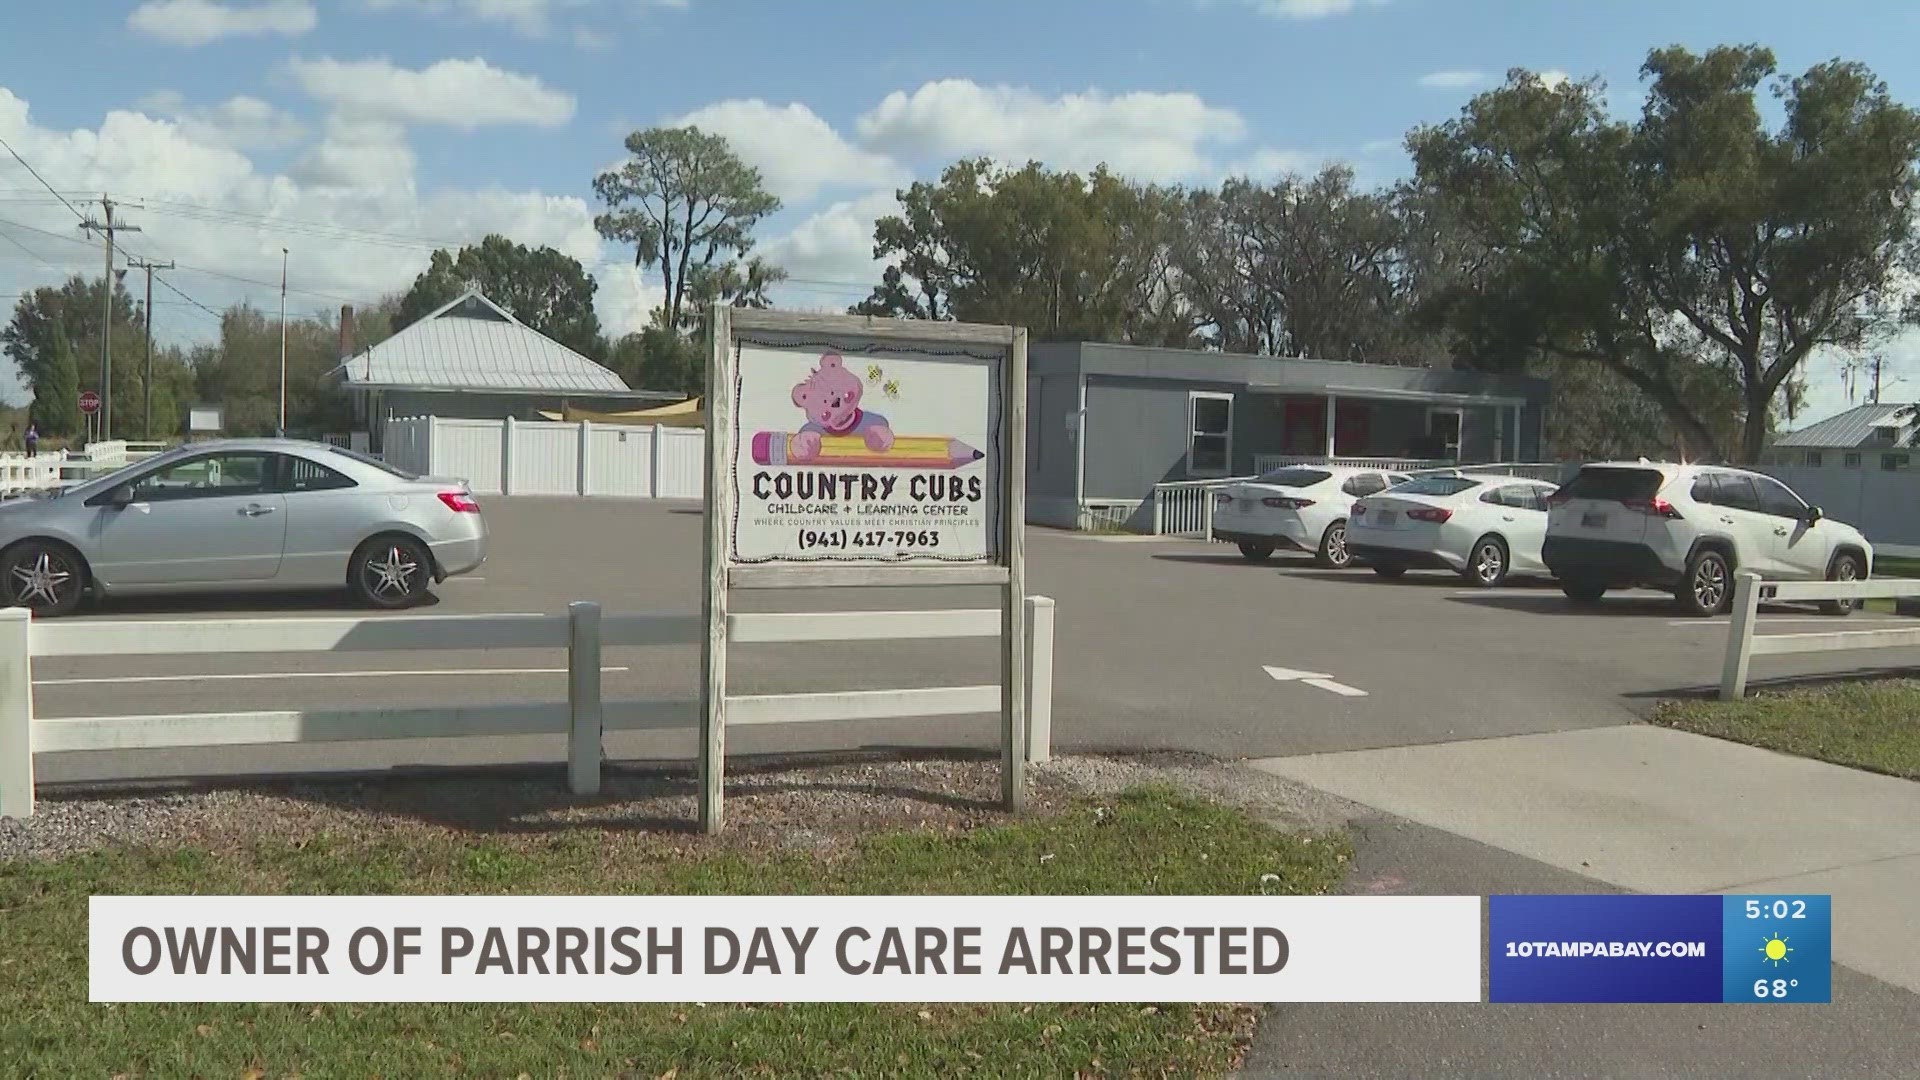 The sheriff's office says there is no evidence that crimes against children who attended the facility occurred.